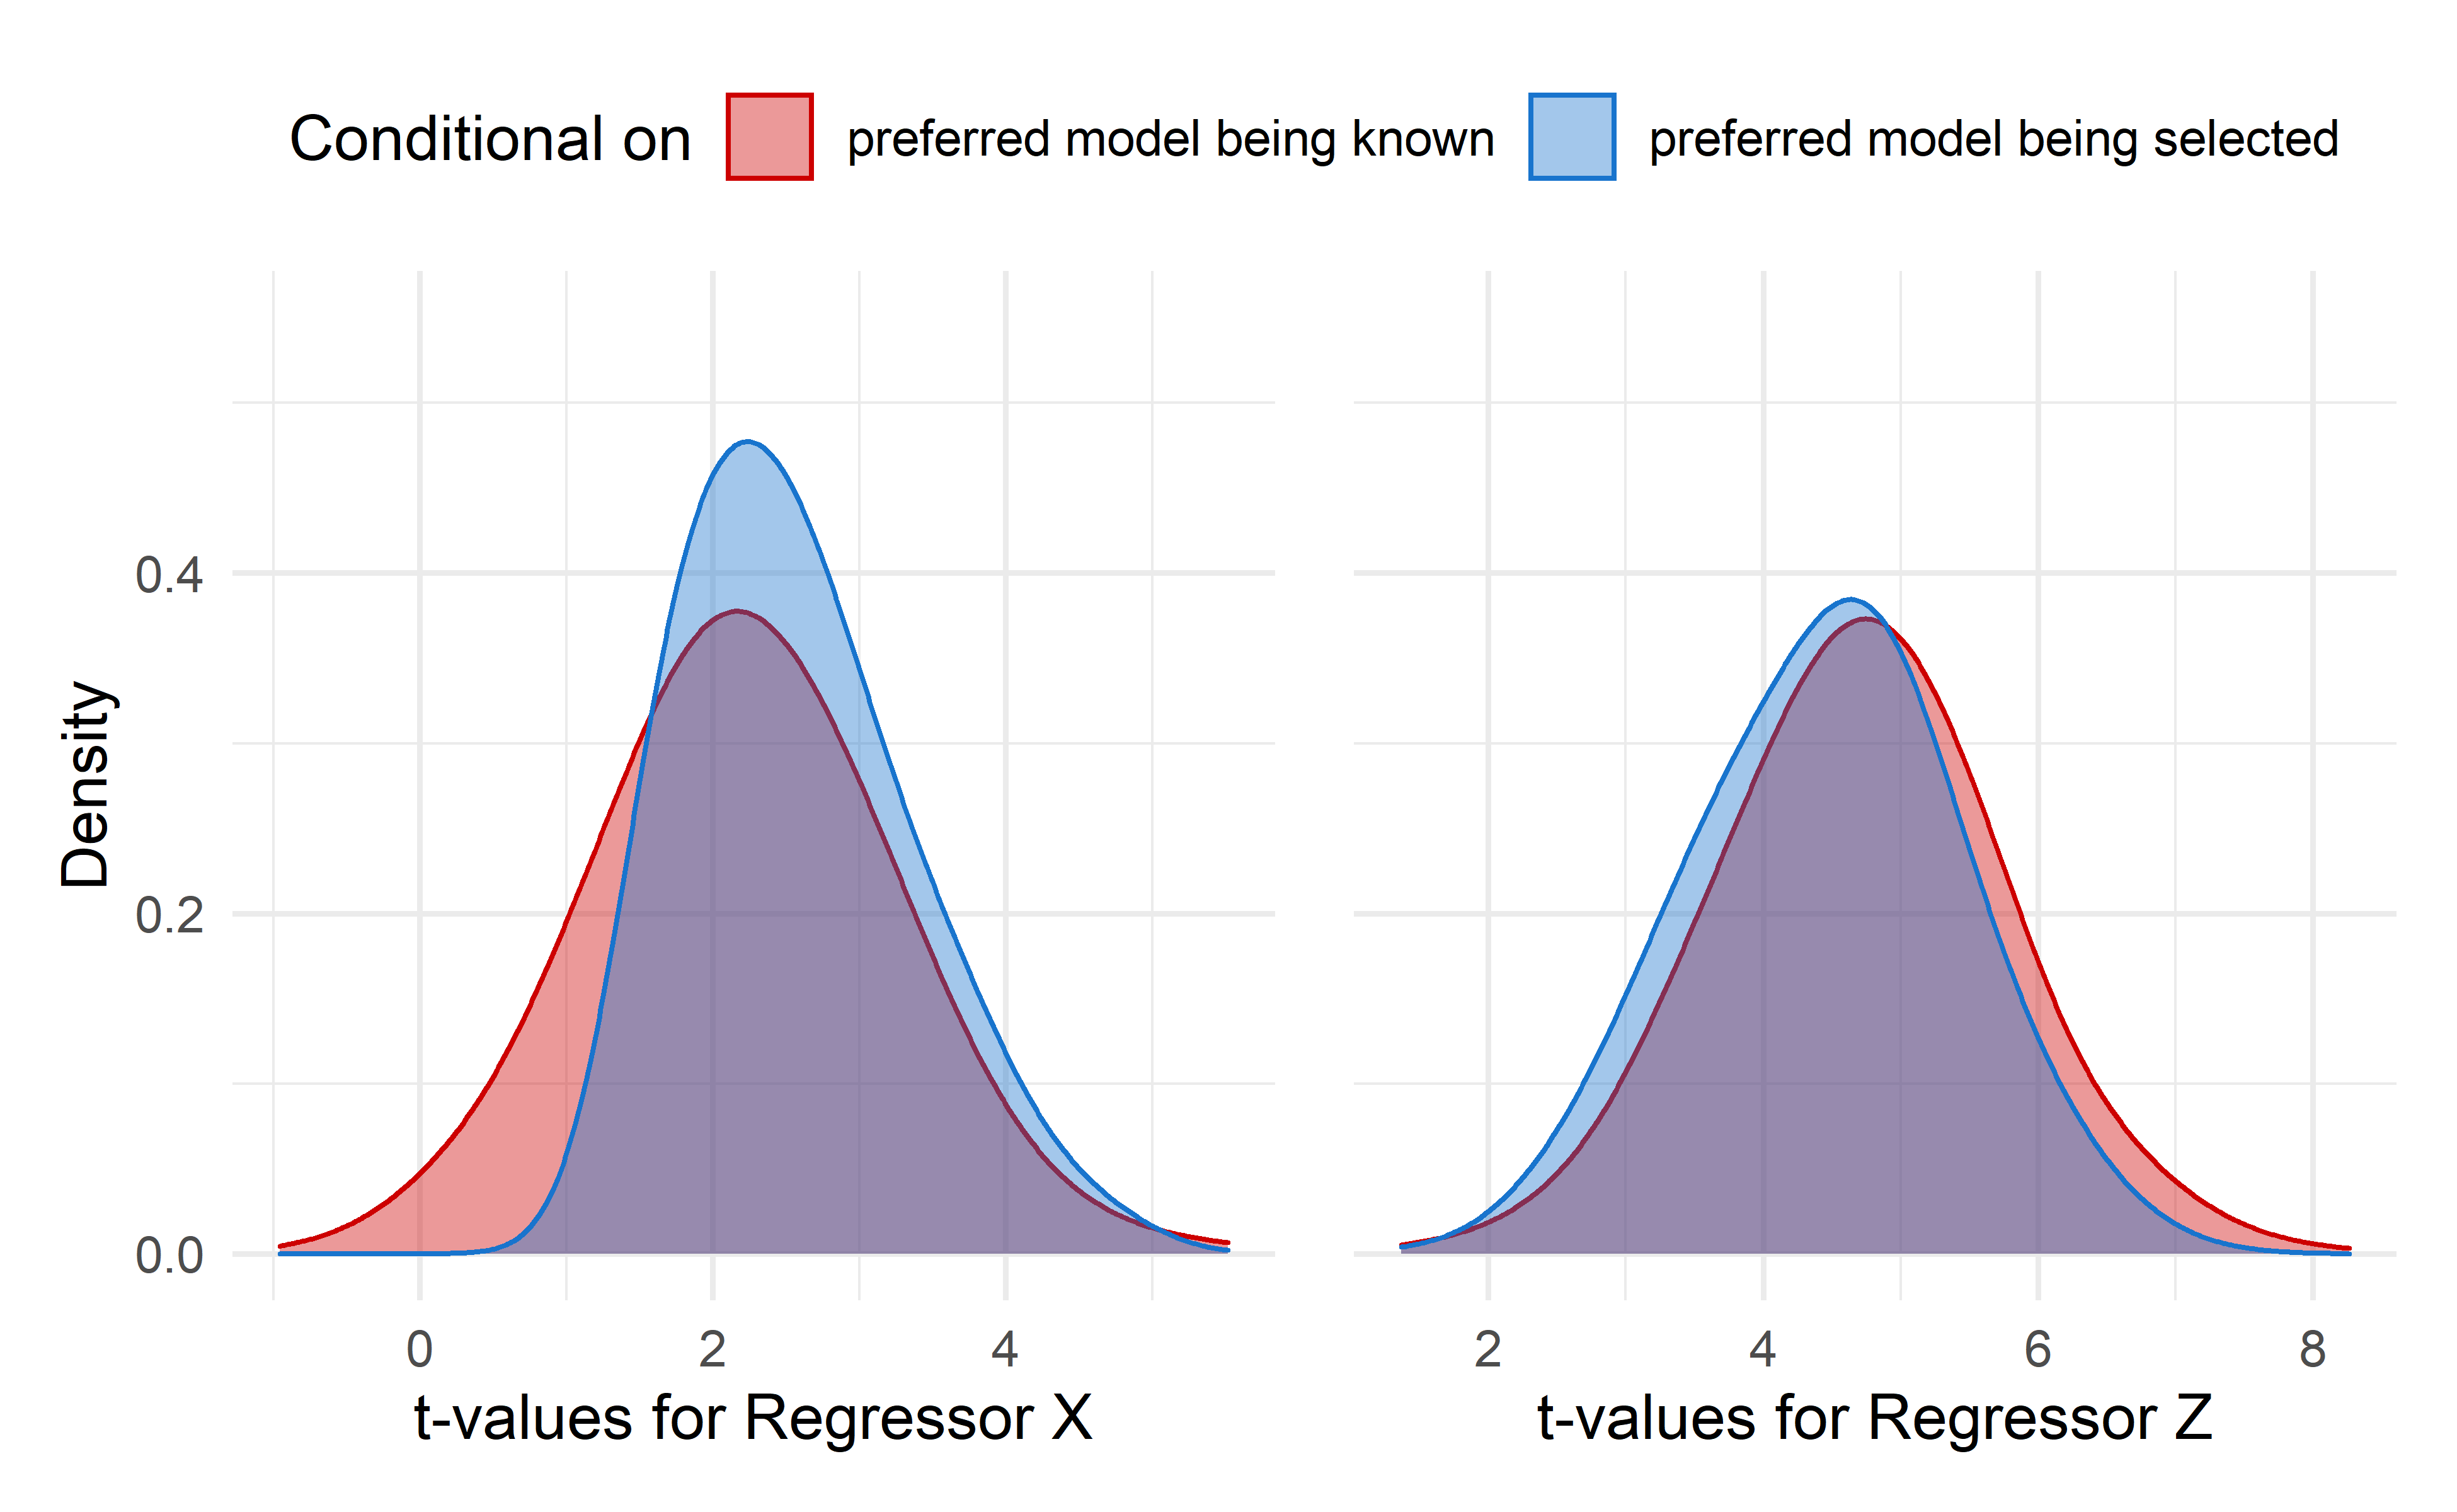 Stepwise regression sampling distributions of the regression coefficient *t*-values for regressors X and Z. Red density plot is is conditional on the preferred model being known. The blue density plot is conditional on the preferred model being selected